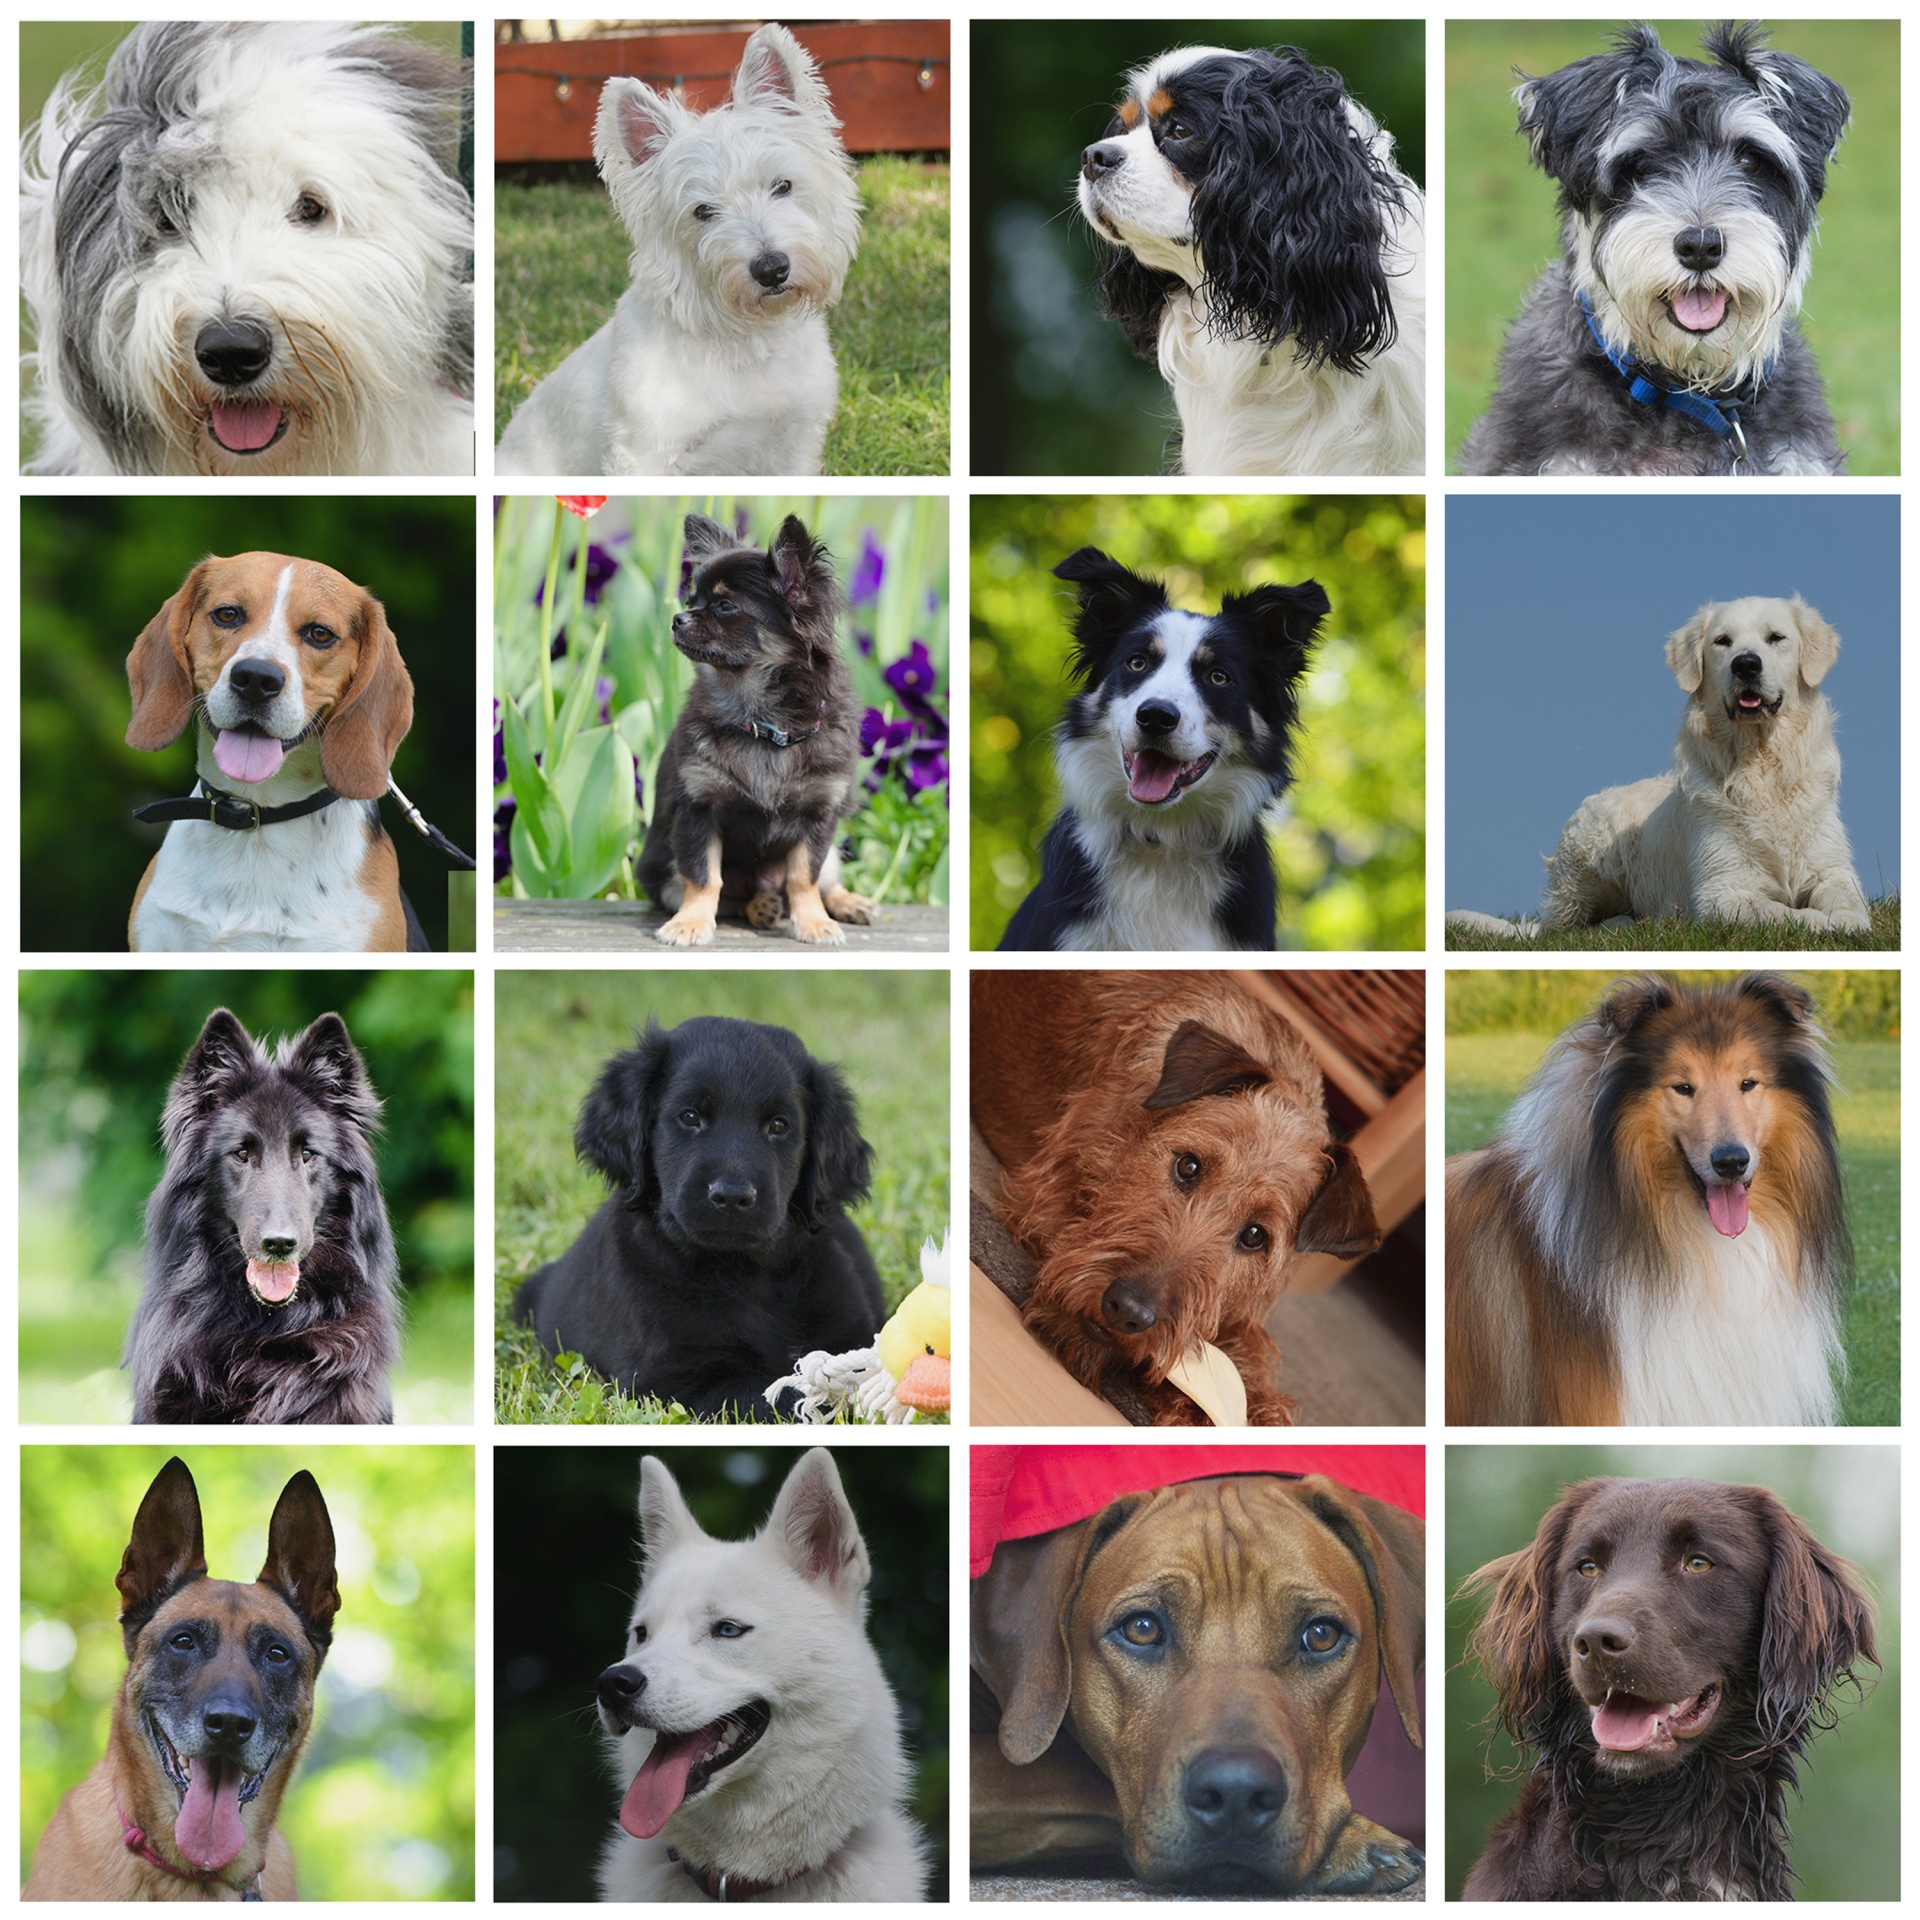 Dog breeds in today’s world